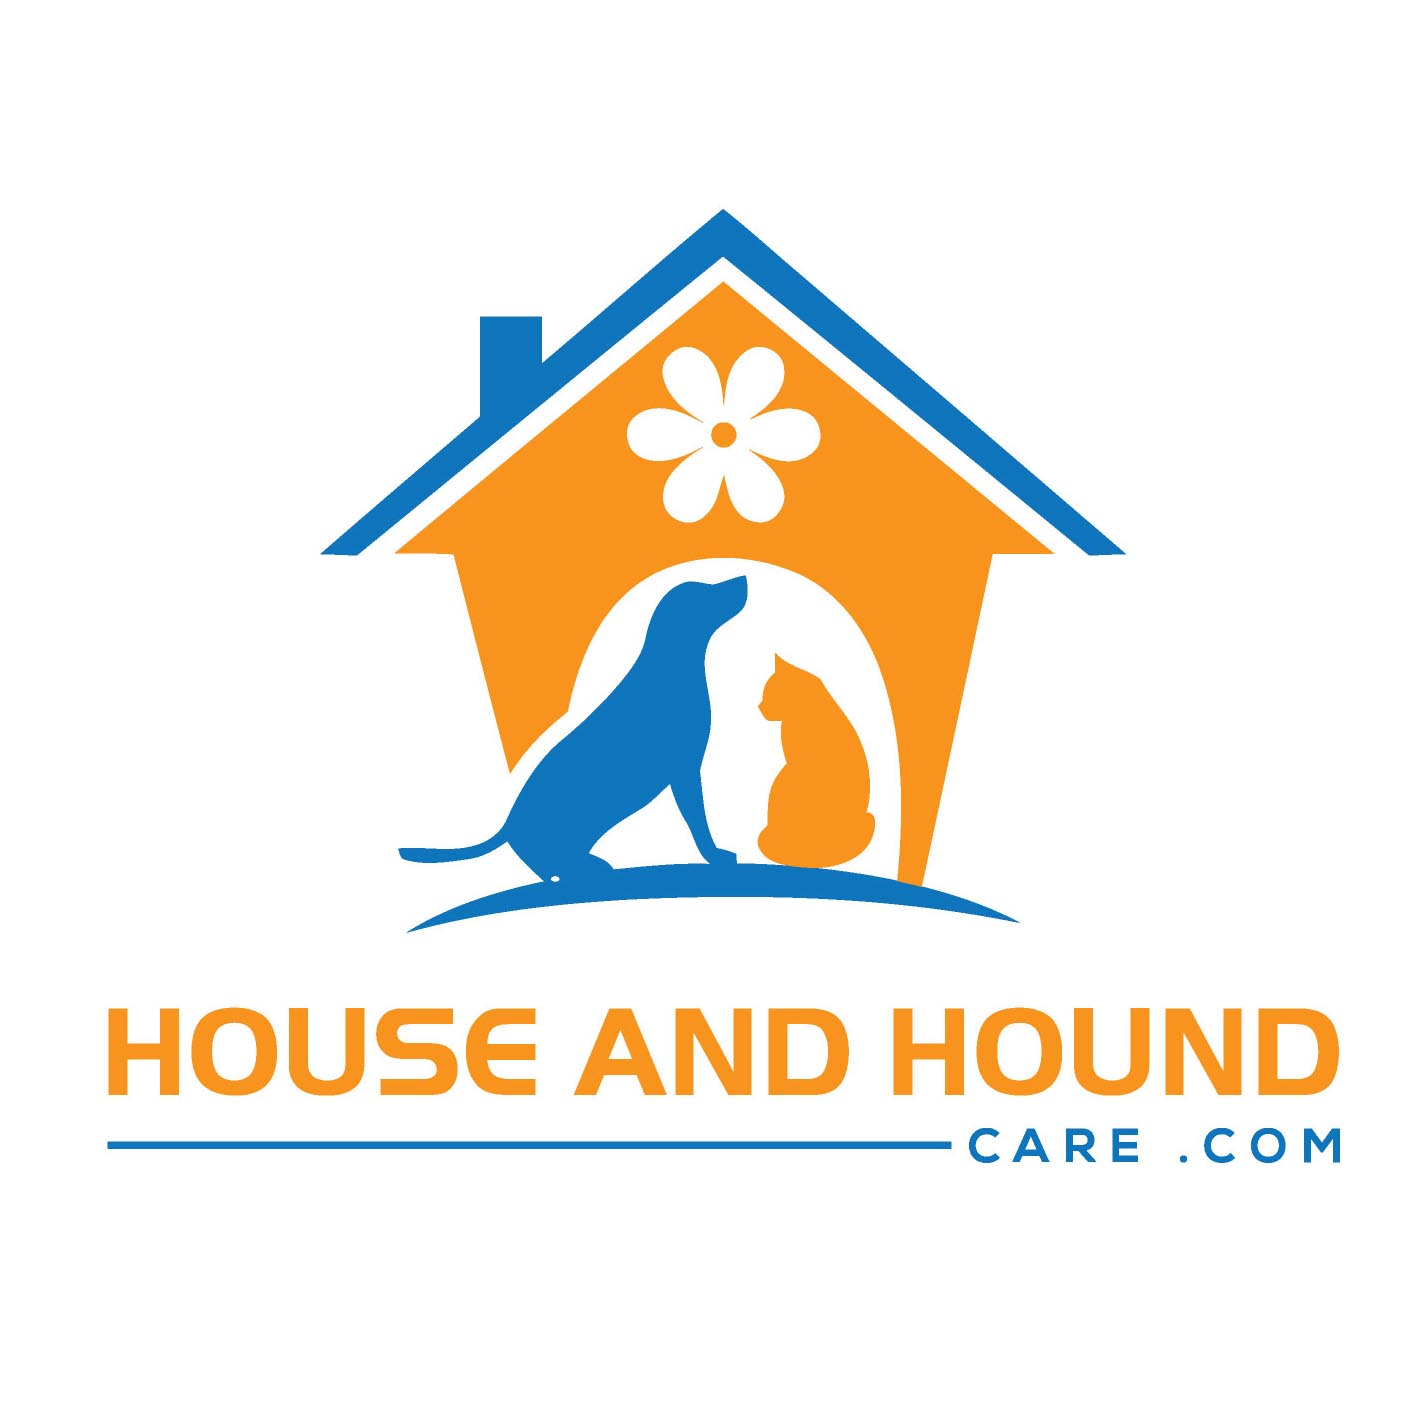 House and Hound Care